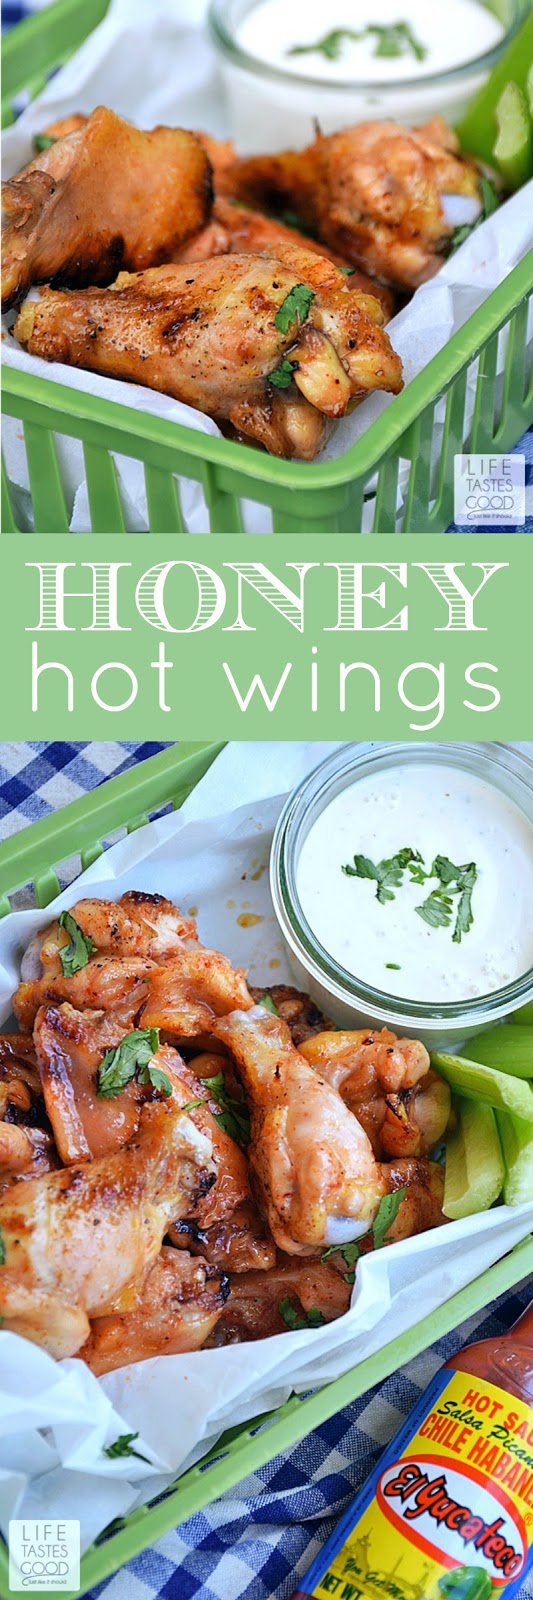 Summer is the best time to get your grill on! There's not much better than firing up the grill and breaking bread with family and friends. One of my favorite grilling recipes is Honey Hot Wings, because eating with your hands is also a favorite summer pastime. #KingOfFlavor #ad